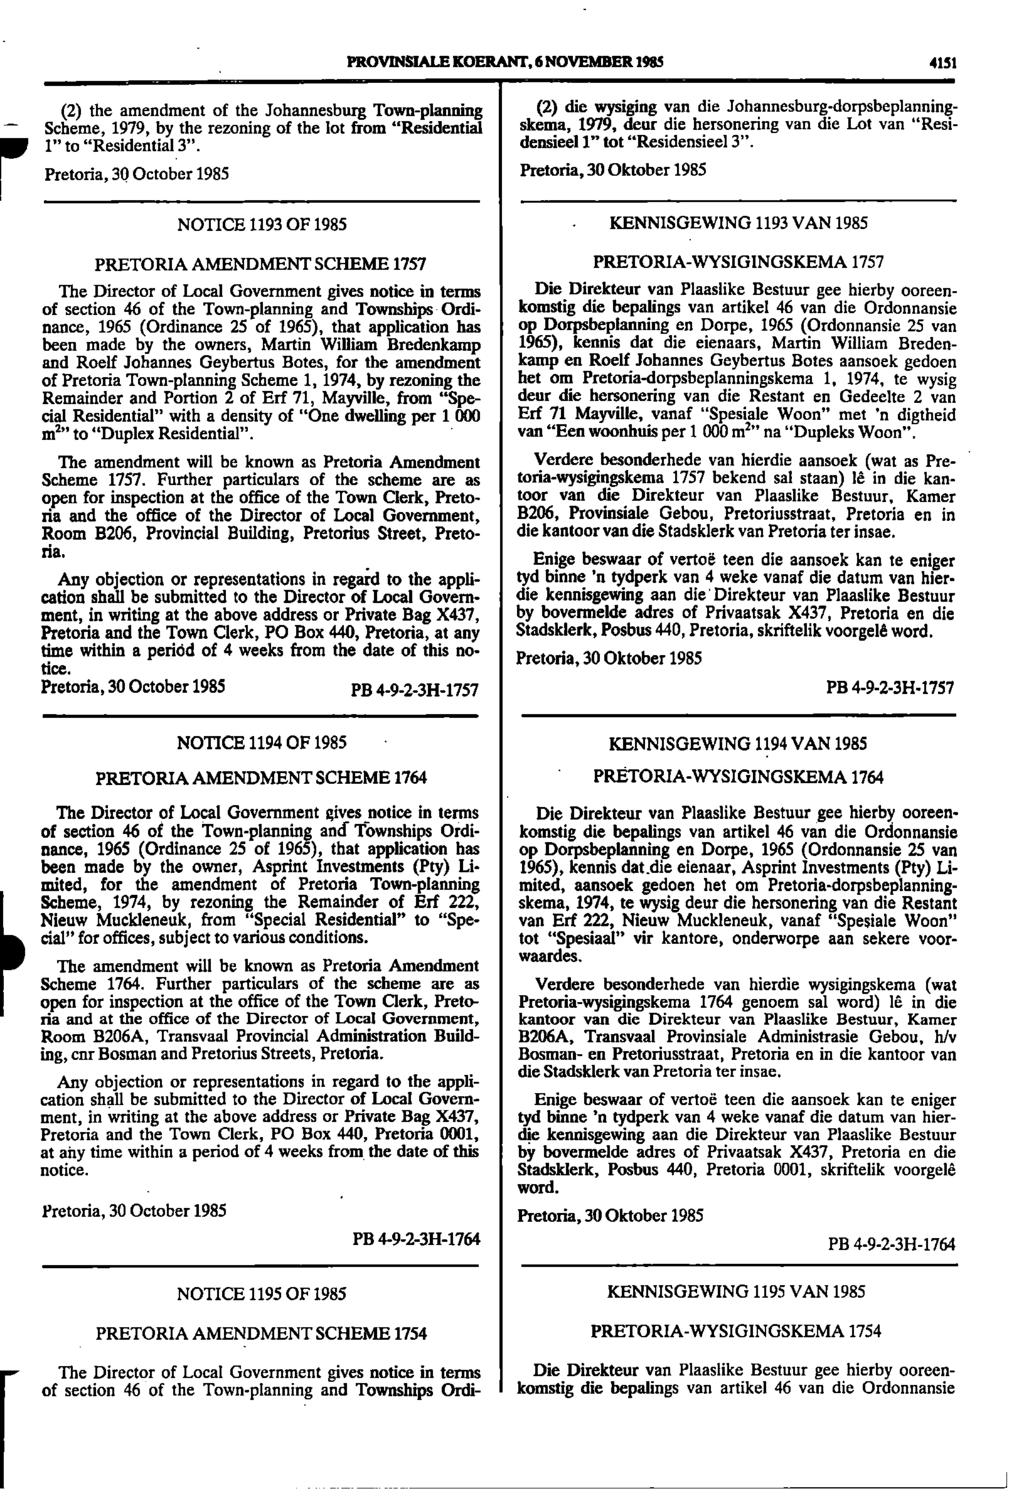 PROVINSIALE KOERANT, 6 NOVEMBER 1985 4151 (2) the amendment of the Johannesburg Townplanning (2) die wysiging van die Johannesburg dorpsbeplanning Scheme, 1979, by the rezoning of the lot from